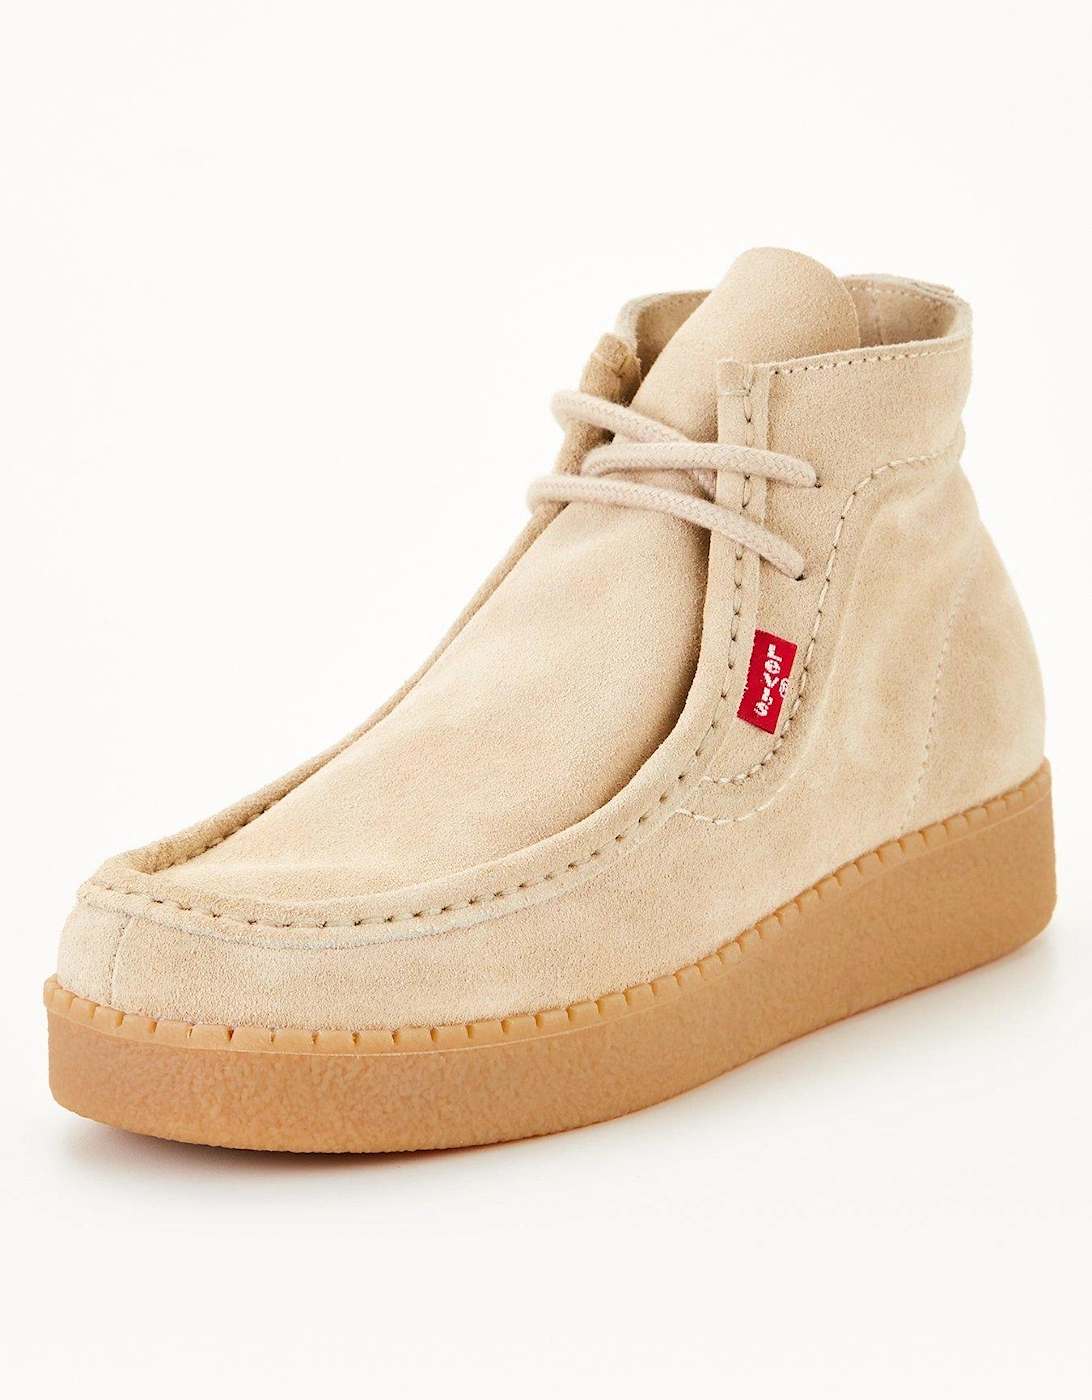 Suede Red Tab Boot - Beige